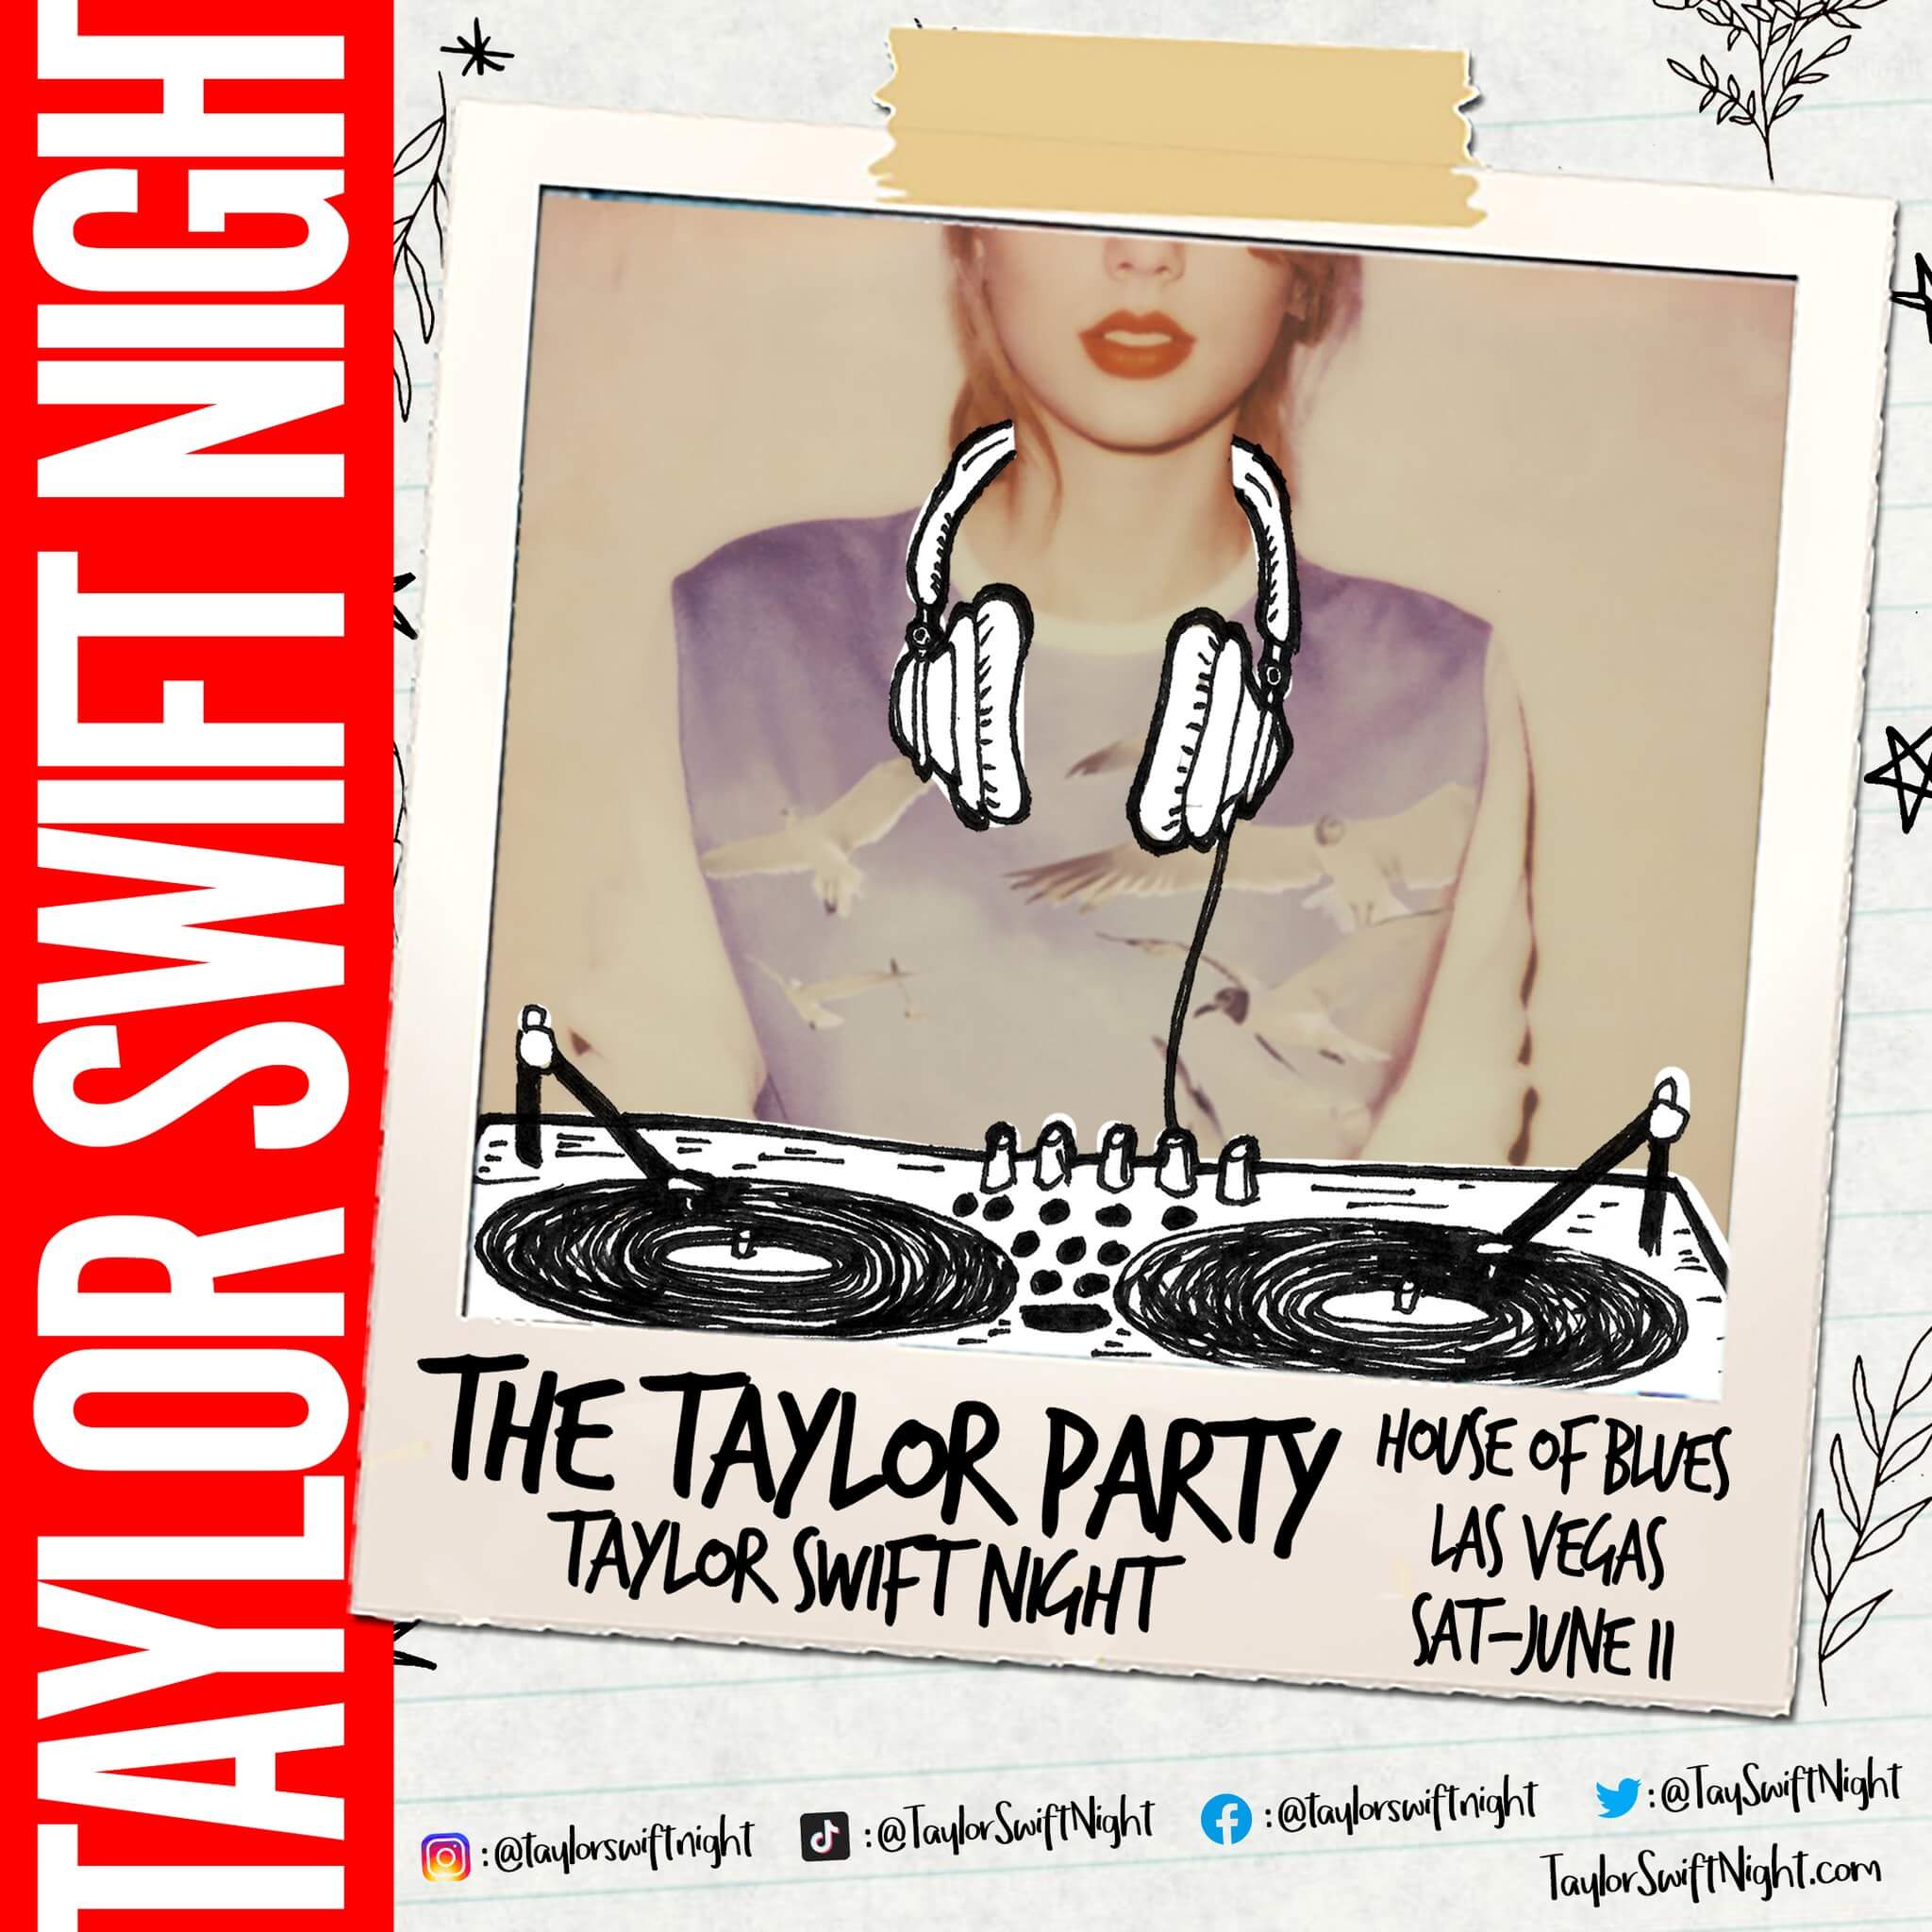 THE TAYLOR PARTY: TAYLOR SWIFT NIGHTHouse of Blues Las Vegas